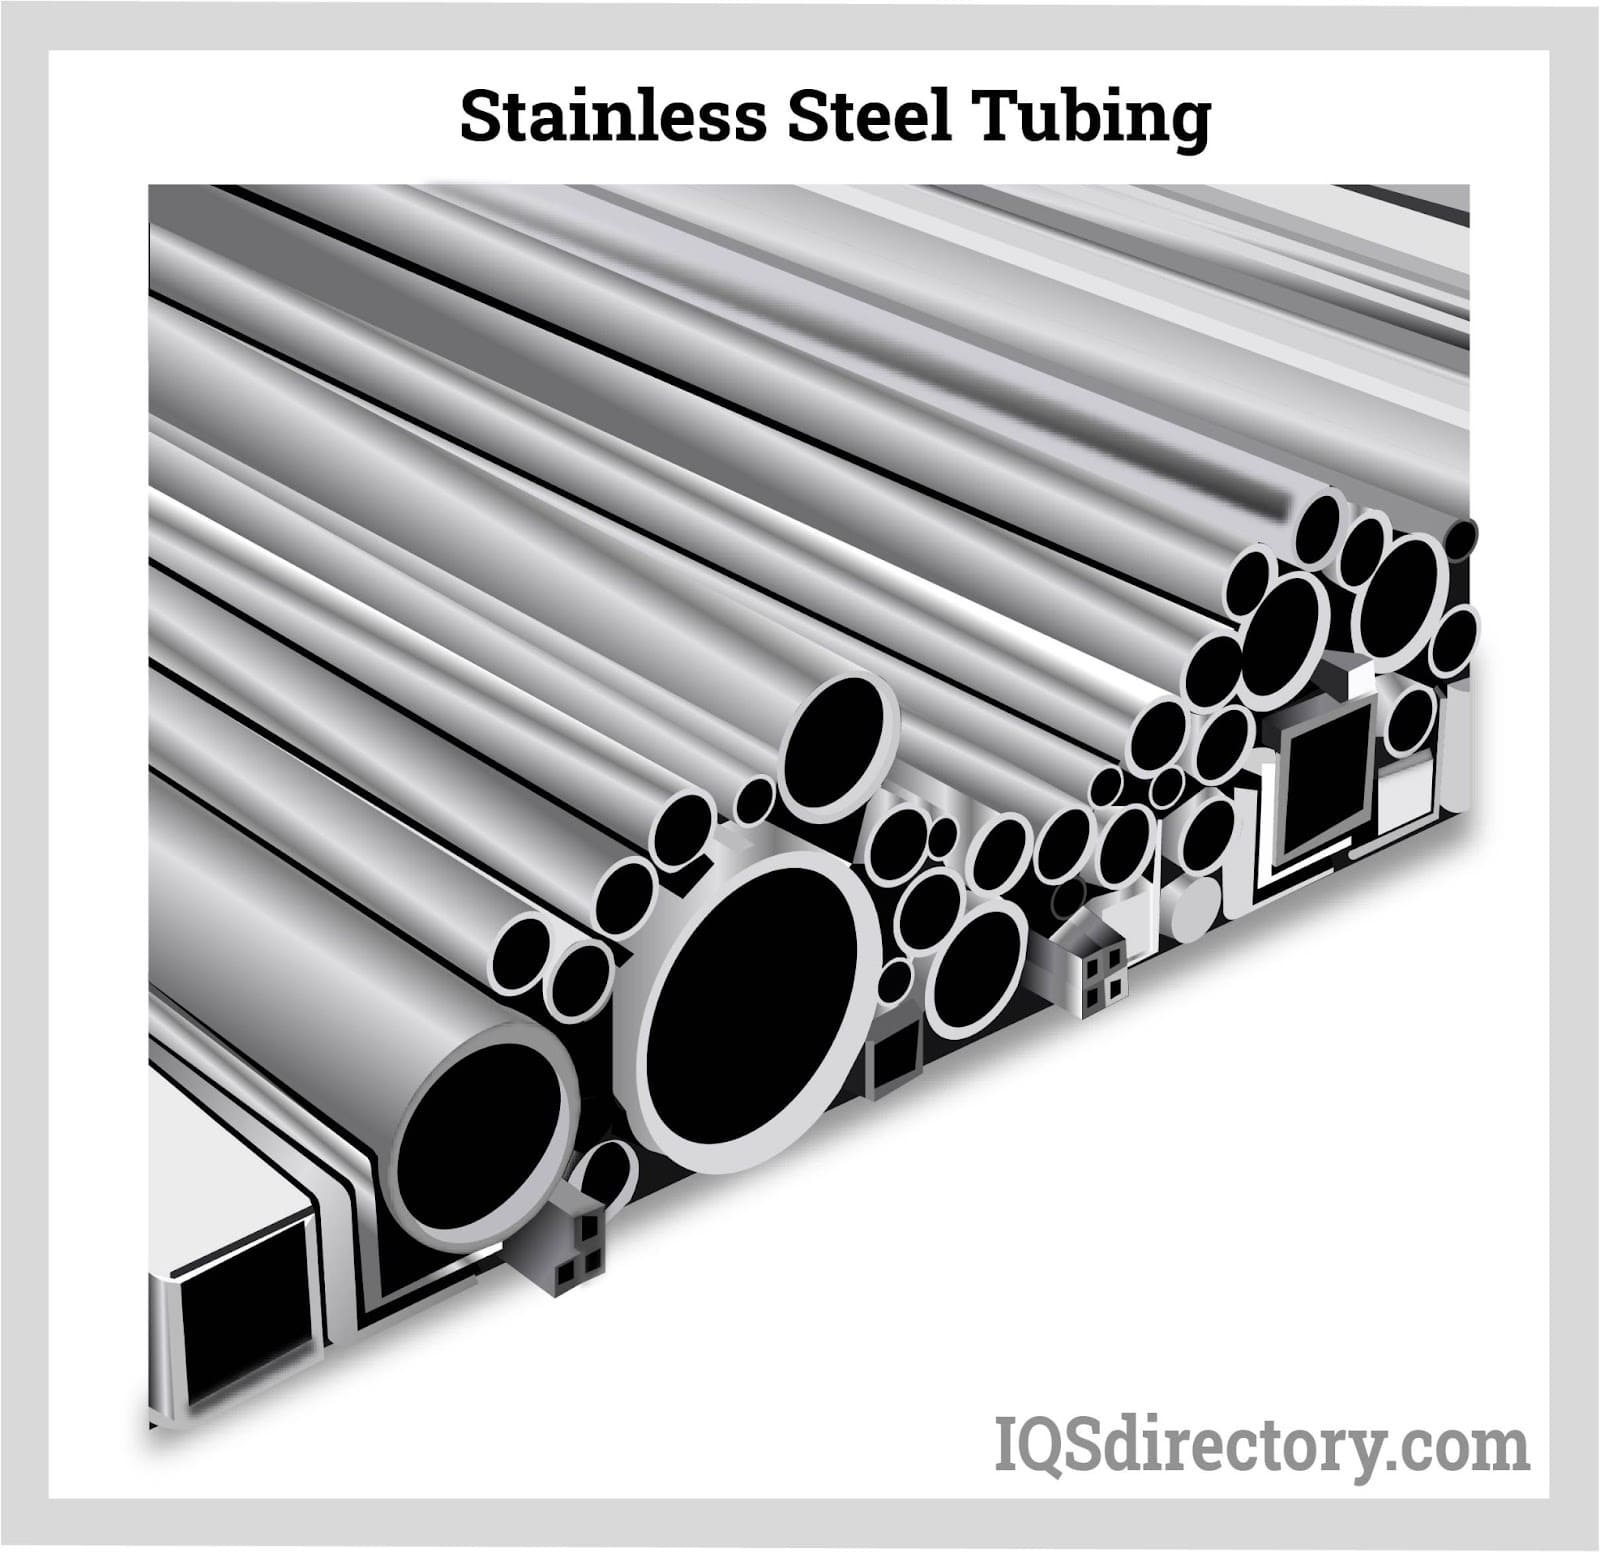 Stainless Steel Oval Pipes  ASTM A554 Stainless Steel Oval Tubes